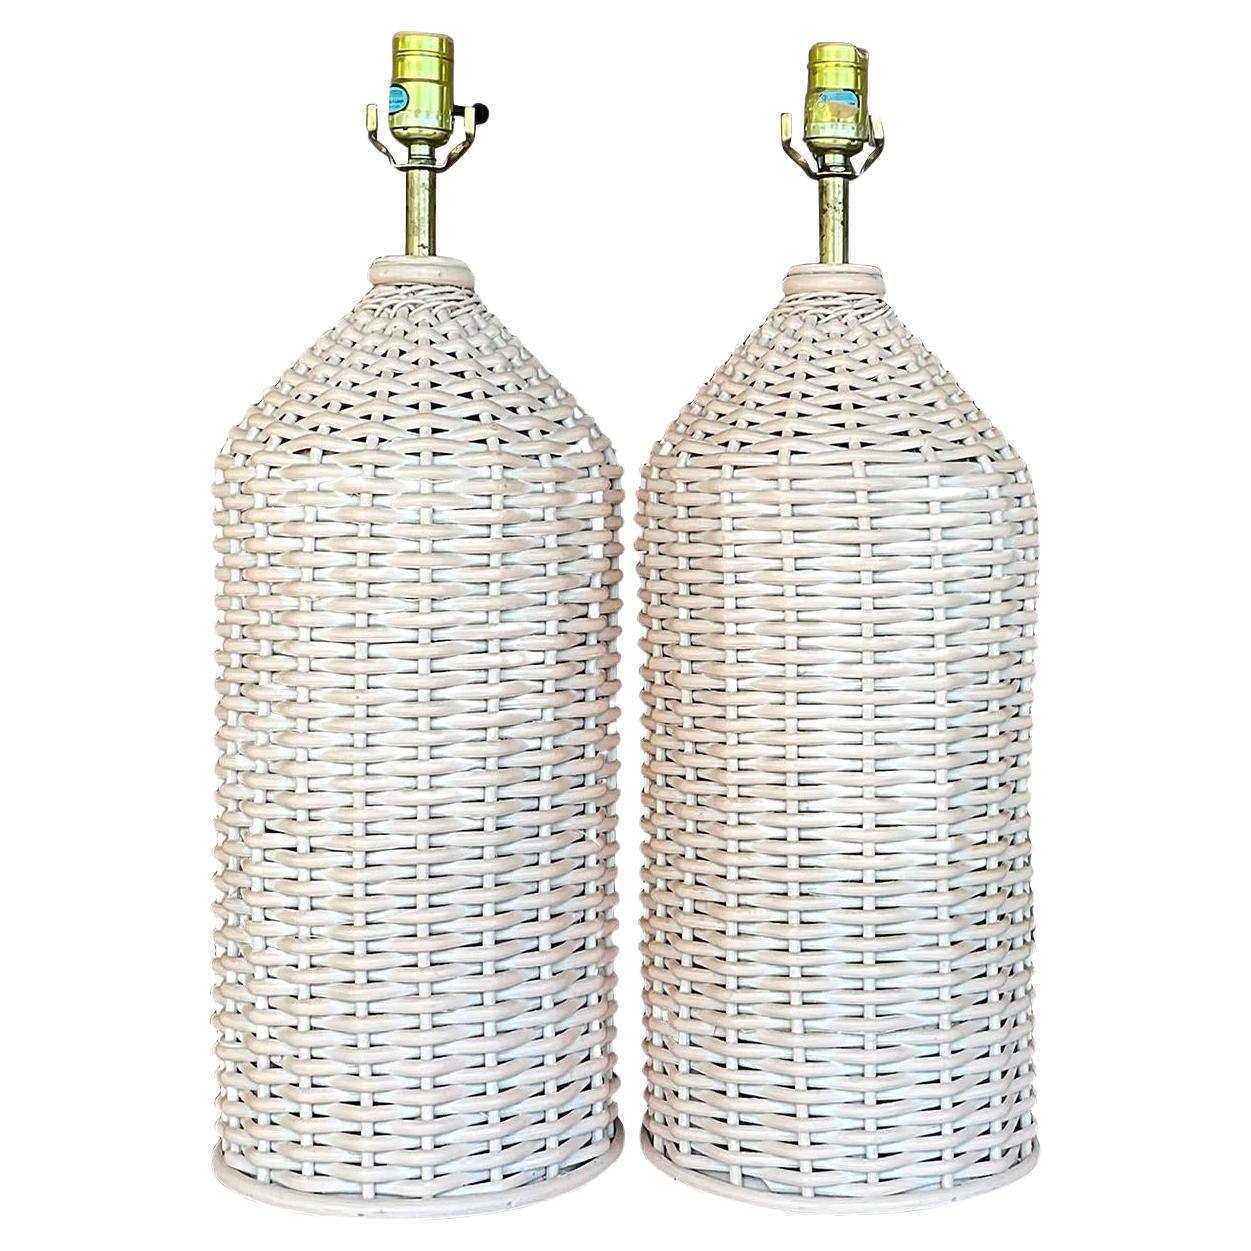 Vintage Coastal Woven Rattan Table Lamps - a Pair For Sale